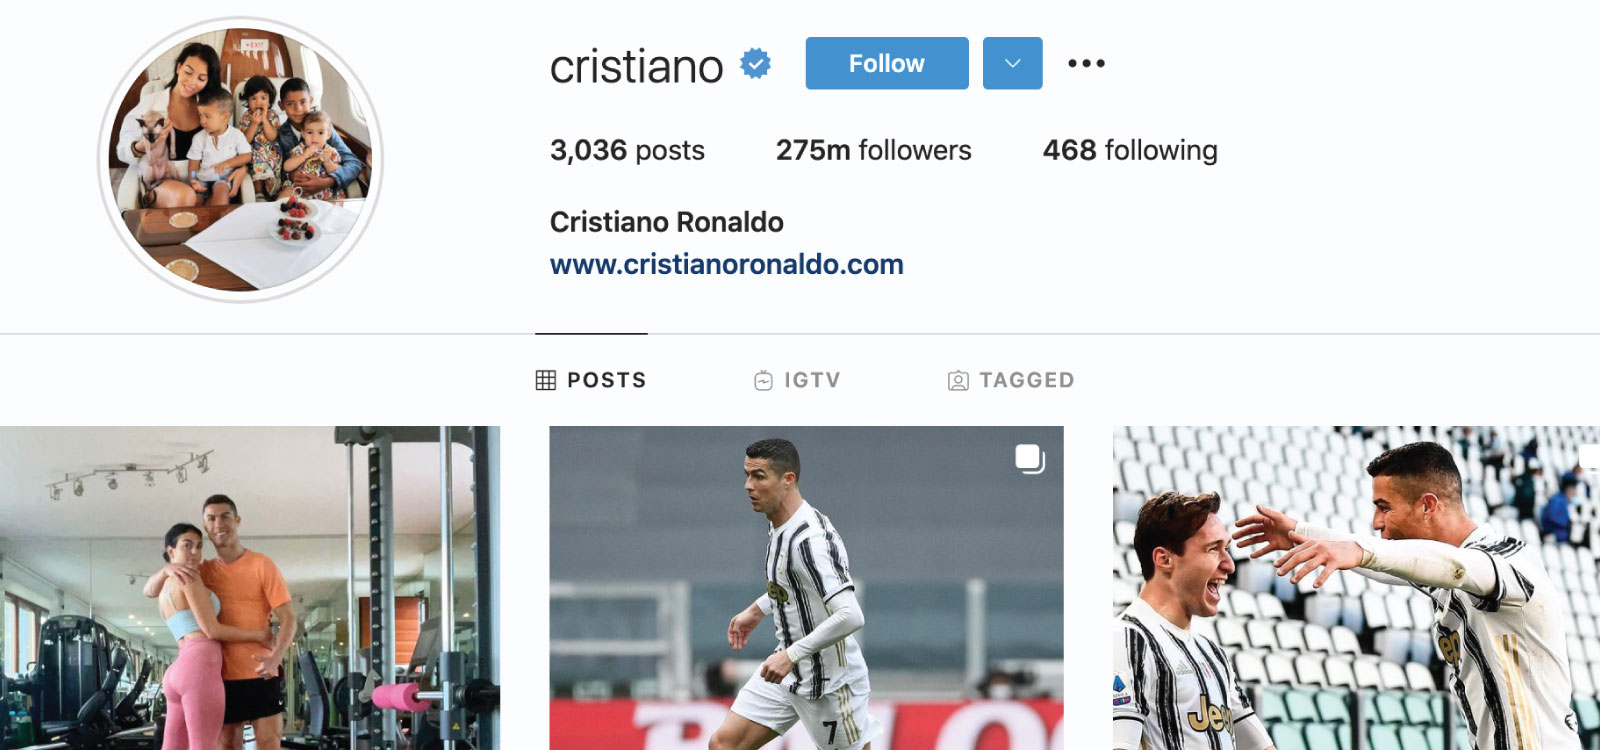 Instagram Statistics and Facts - @Cristiano